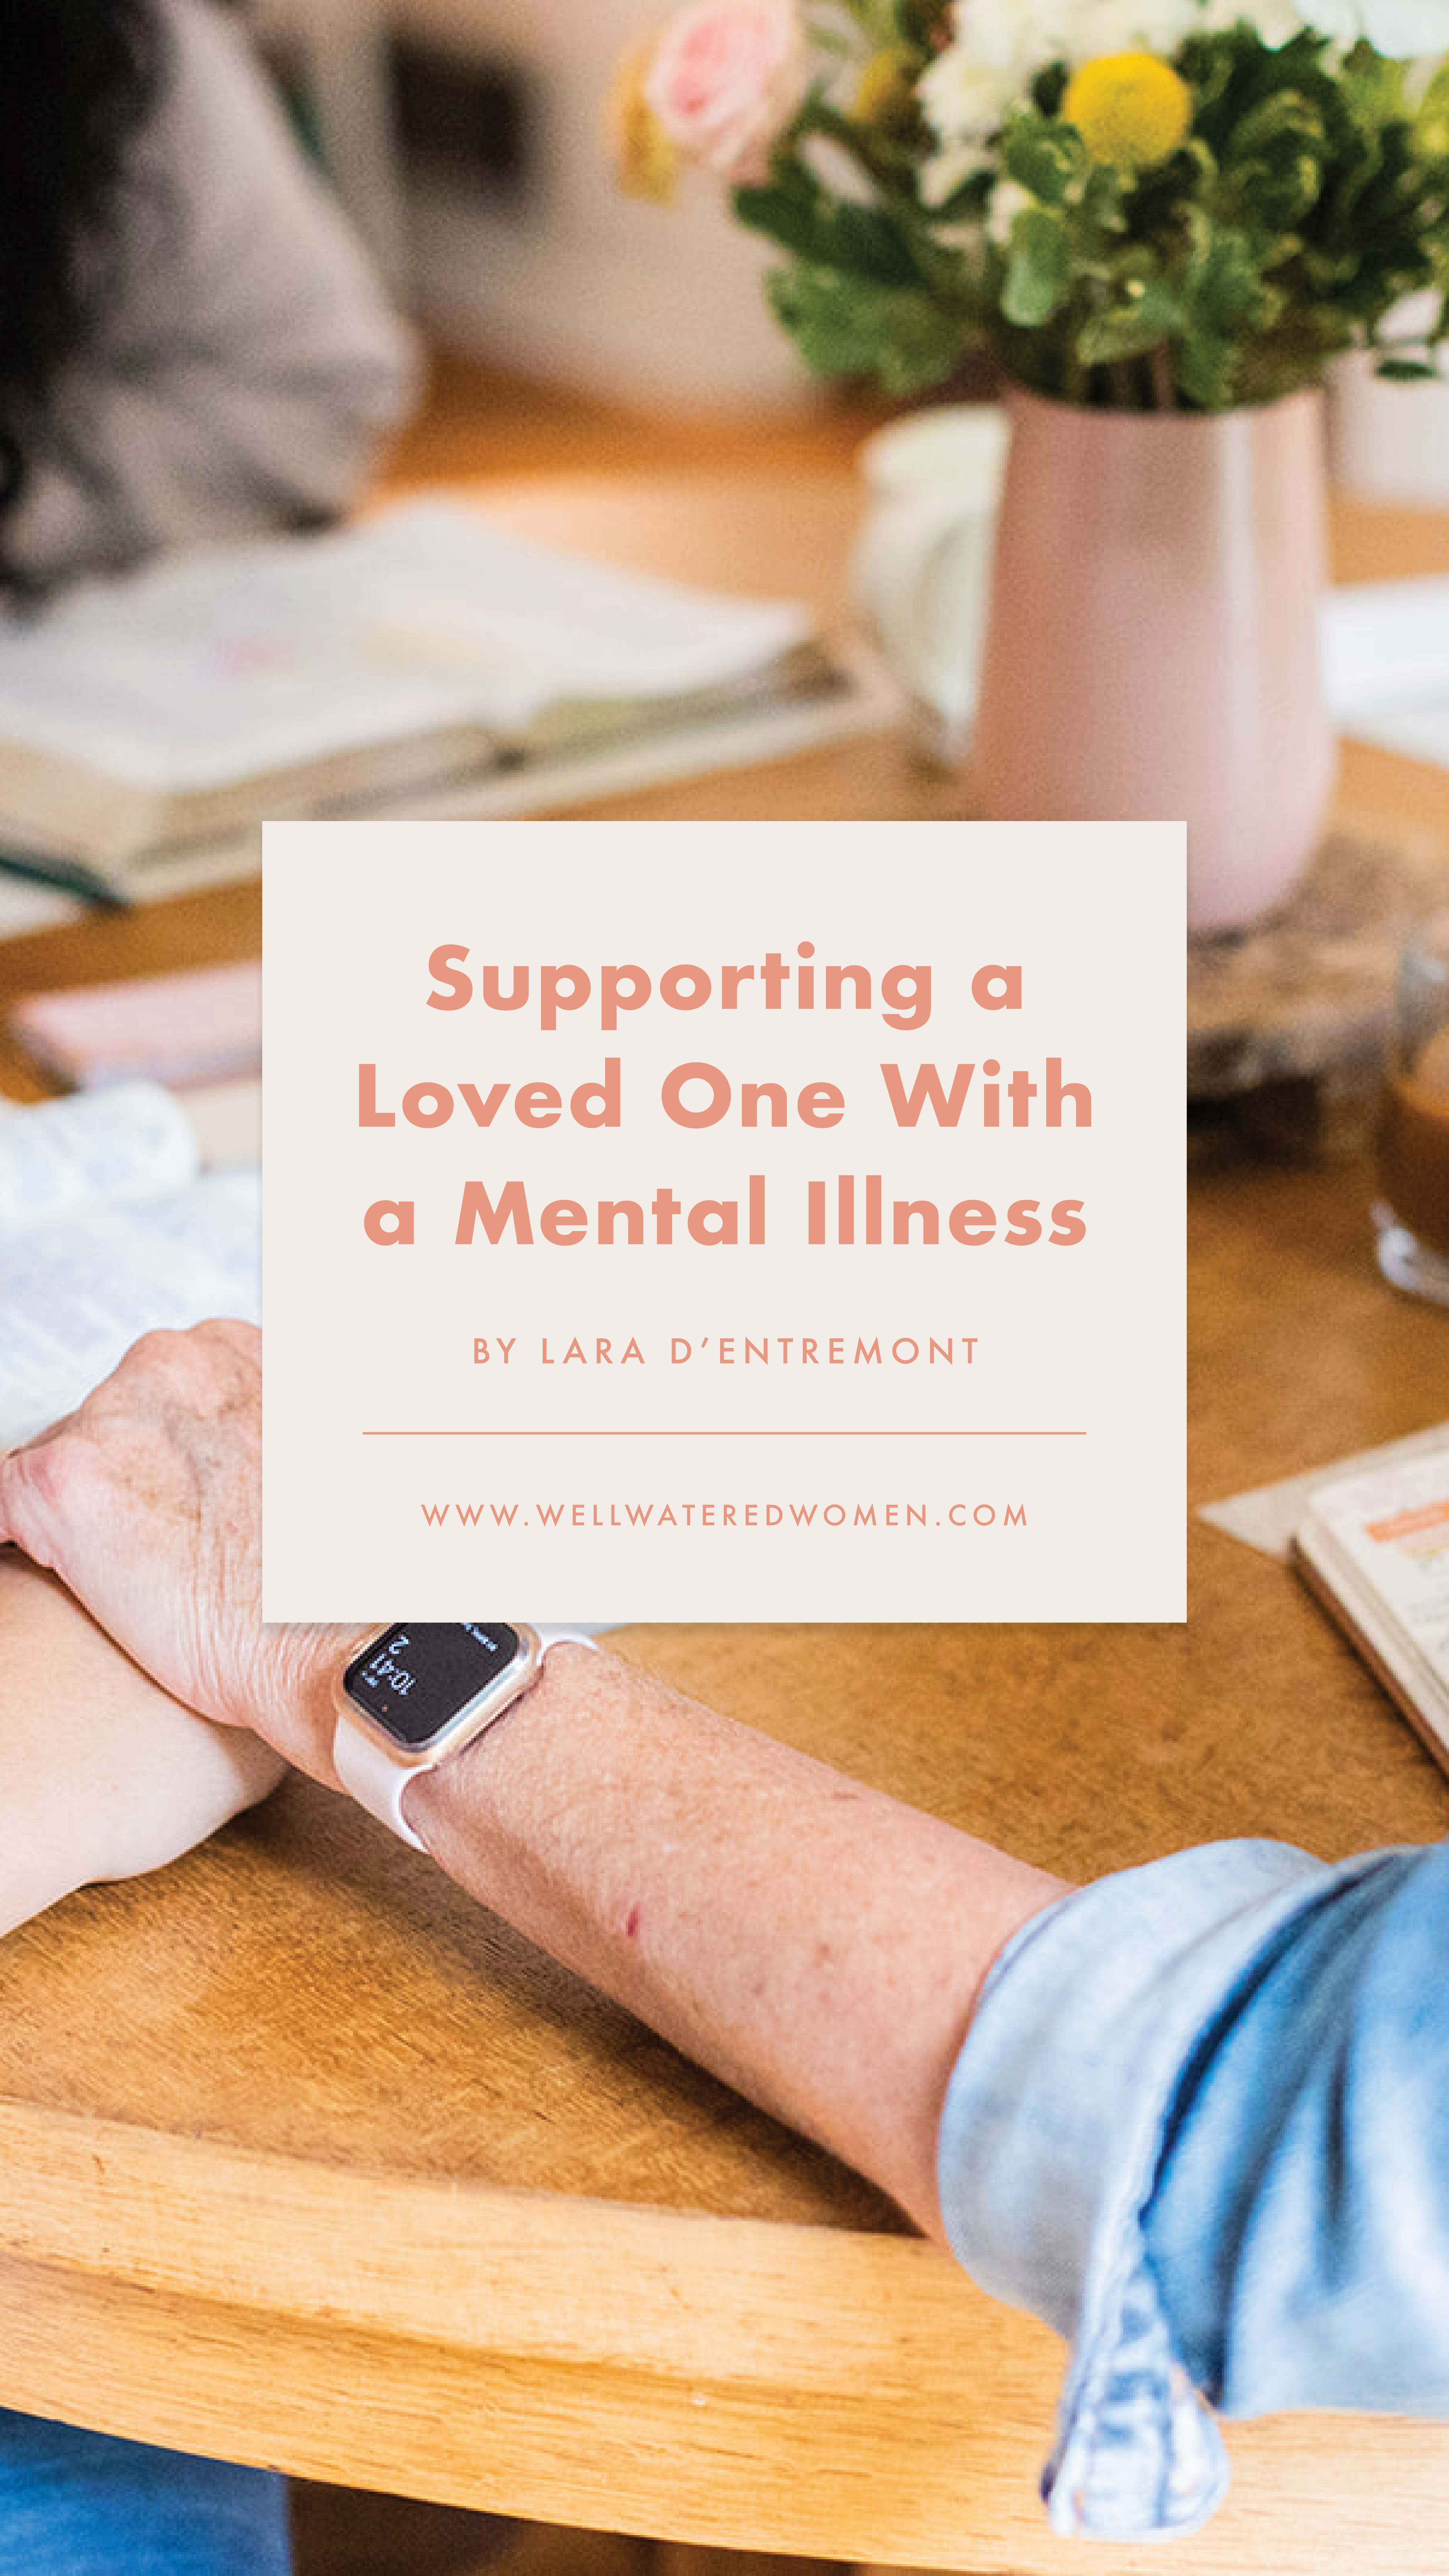 Supporting a Loved One With a Mental Illness - an article from Well-Watered Women - slide